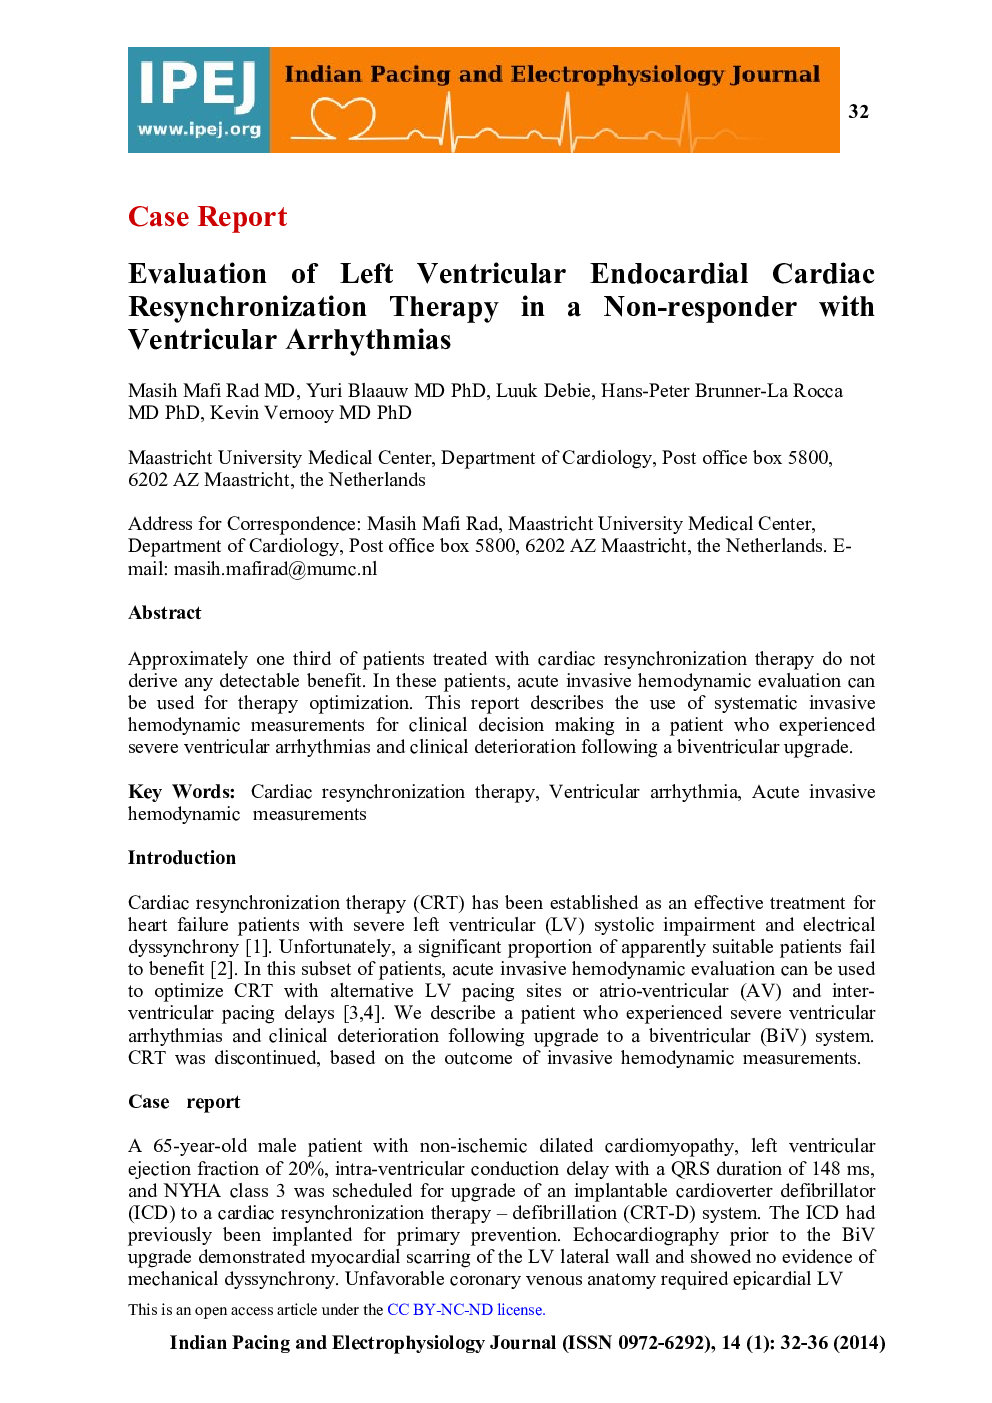 Evaluation of Left Ventricular Endocardial Cardiac Resynchronization Therapy in a Non-responder with Ventricular Arrhythmias